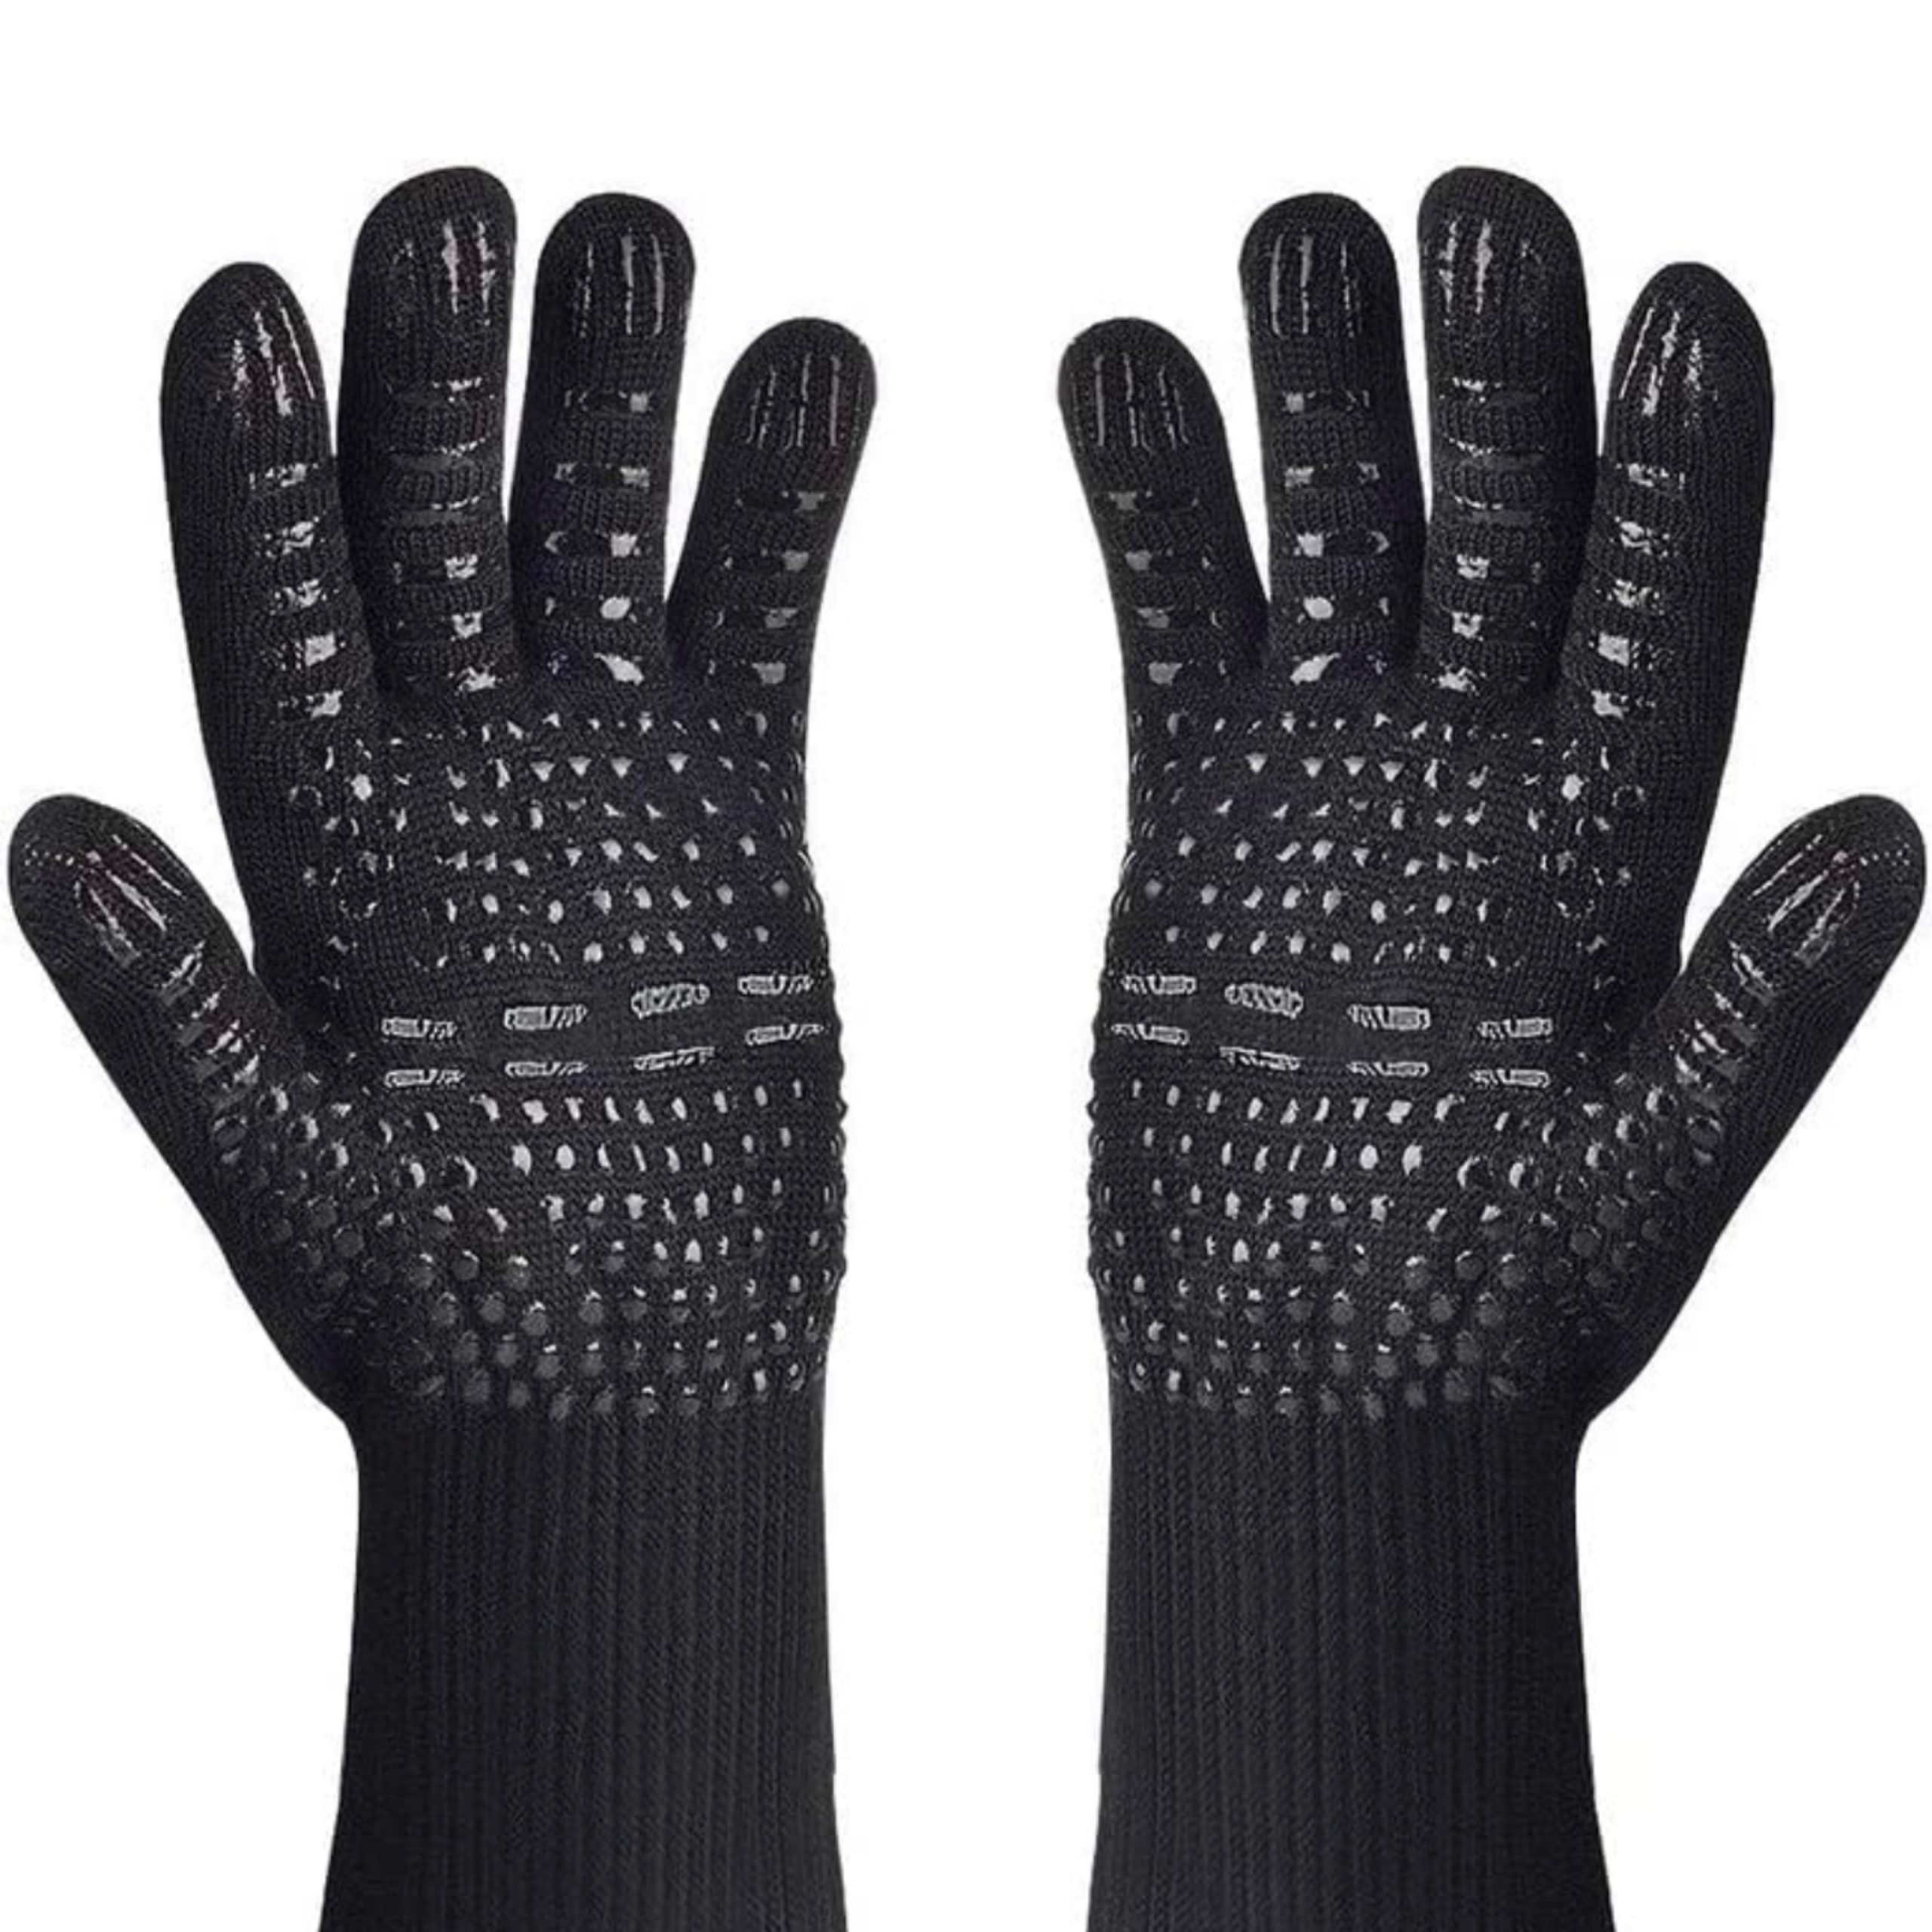 HEAT RESISTANT GLOVES | DRY ICE - DRY ICE MAKERS